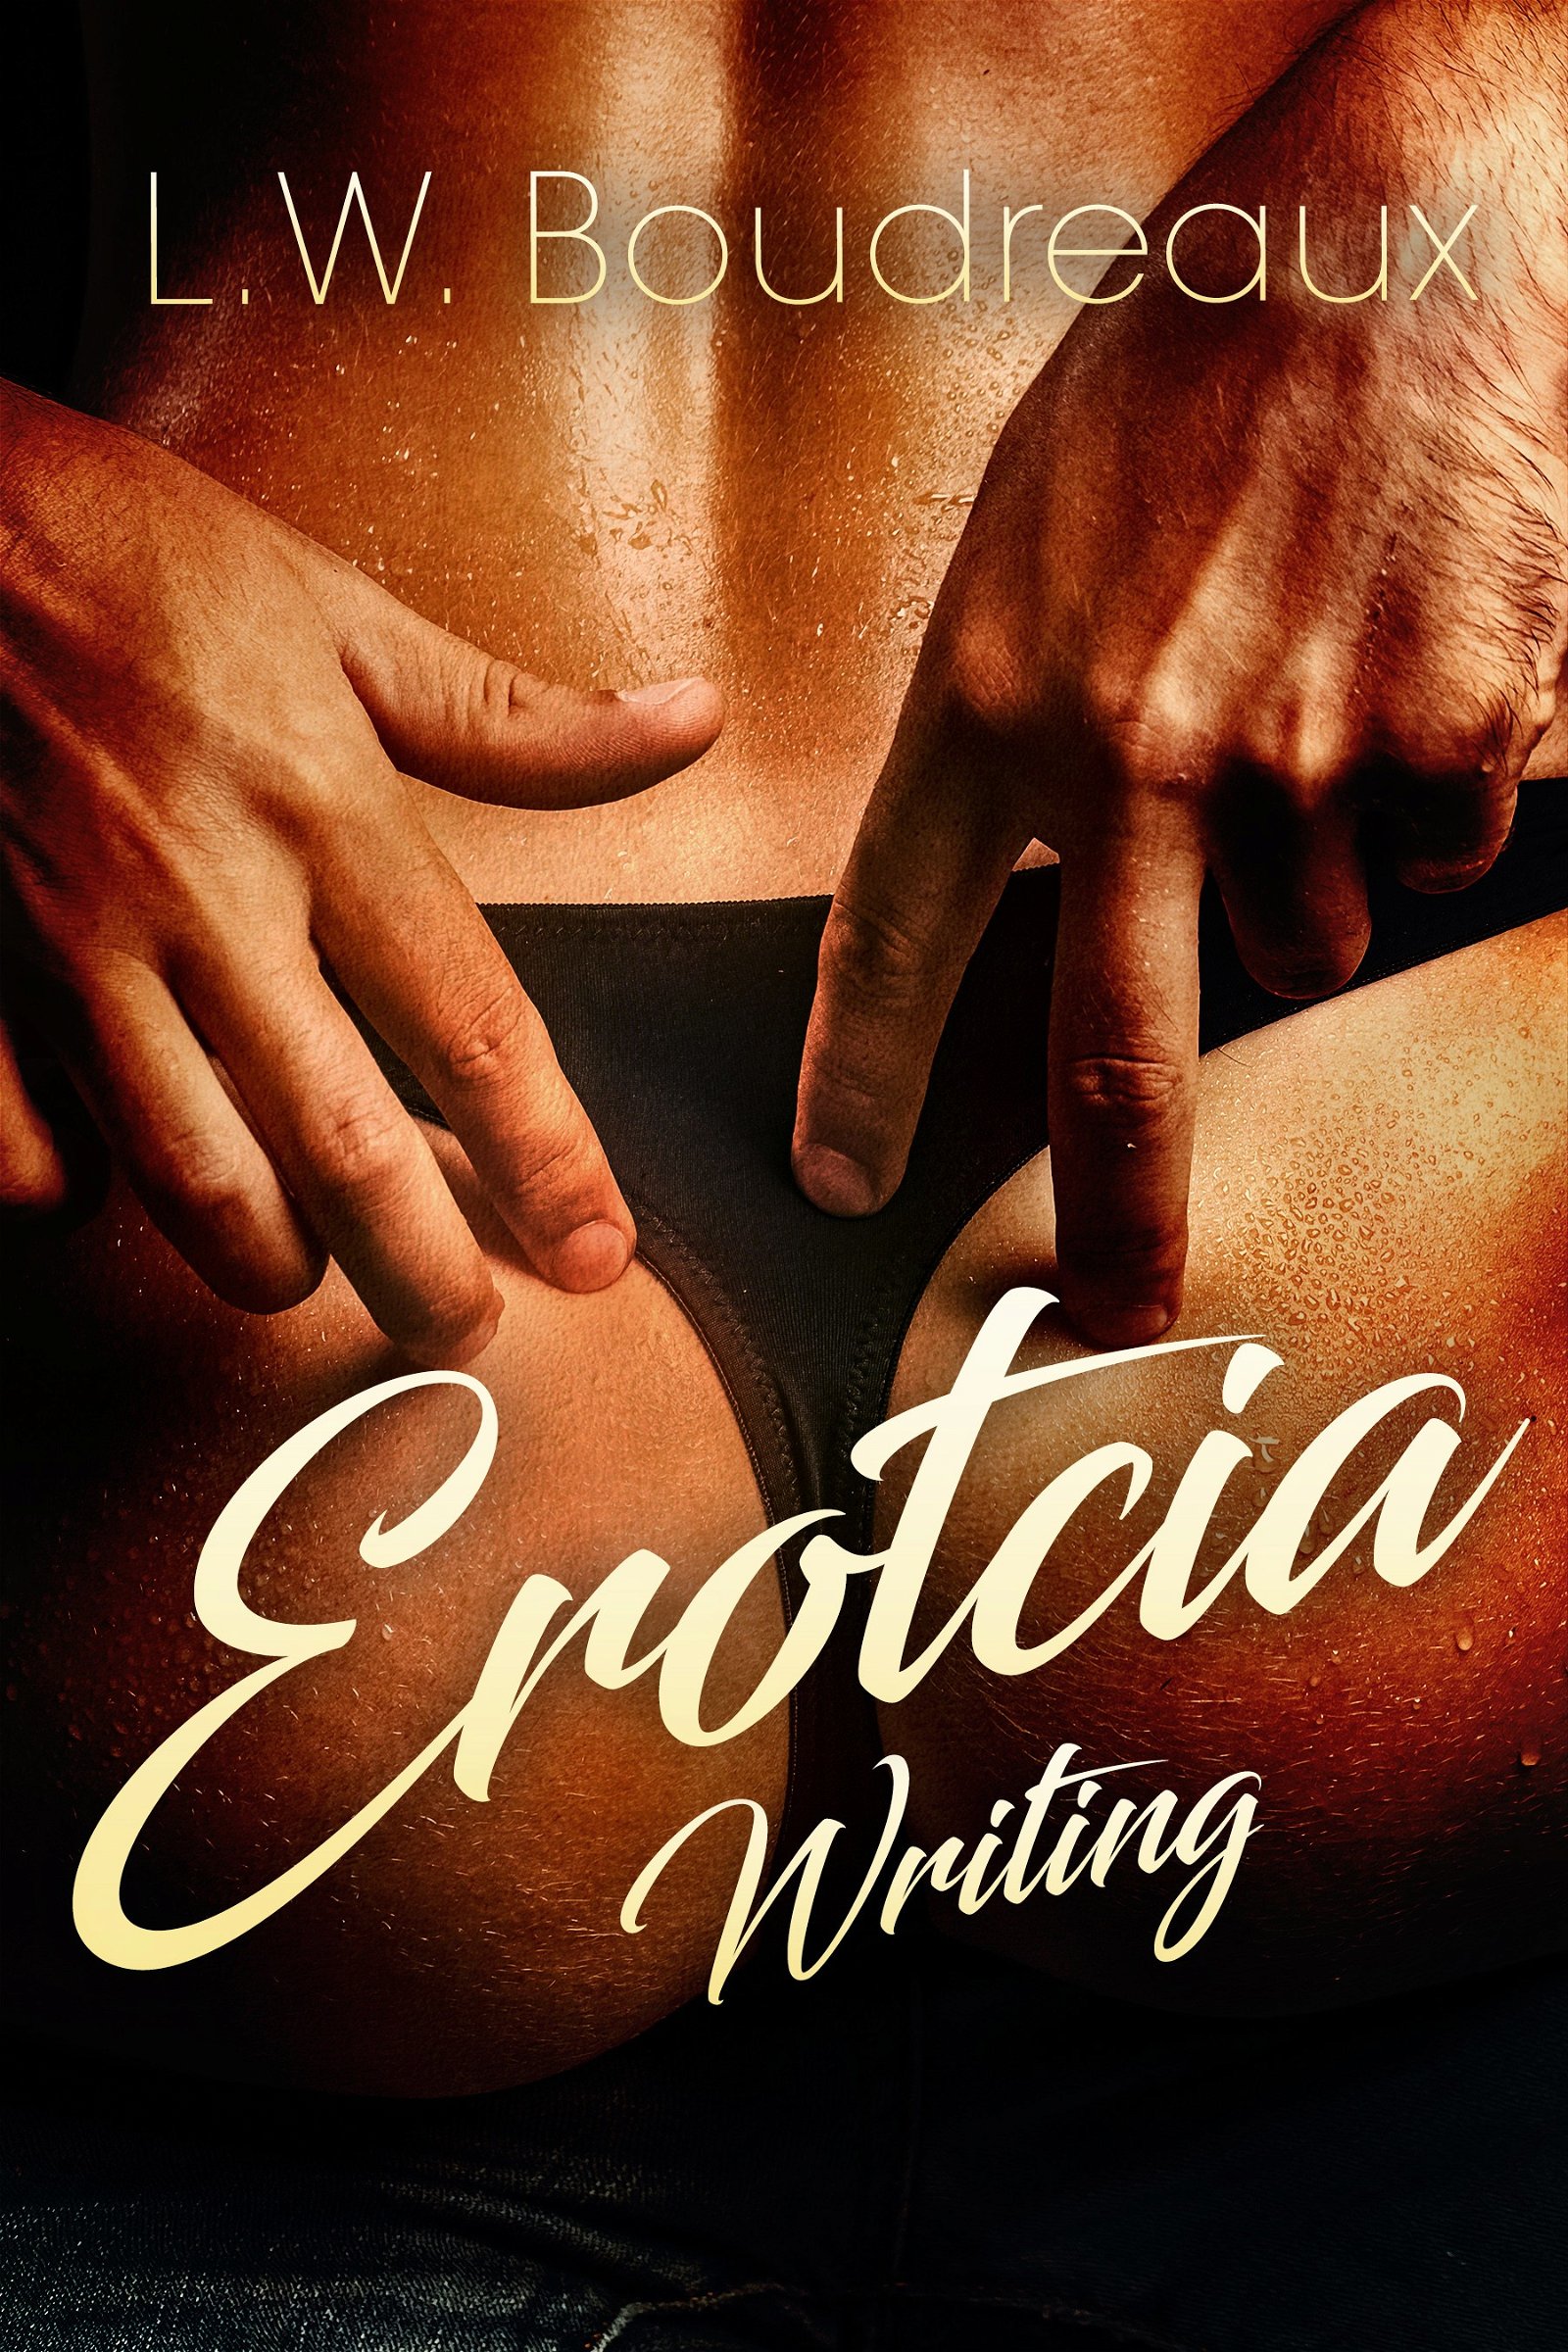 Photo by erotcia with the username @erotcia, who is a verified user,  June 15, 2020 at 6:59 AM. The post is about the topic Erotcia: Erotica books by LW Boudreaux and the text says 'Erotcia Writing: 

The First Anthology. 13 Stories. Hours of orgasms.

https://amzn.to/2AEEQDQ

#erotcia #erotcia #eroticawriting #eroticabooks #eroticaanthology #eroticacollection #eroticacowboy #eroticadoctor #ertoicaalien #eroticataboo #eroticamother..'